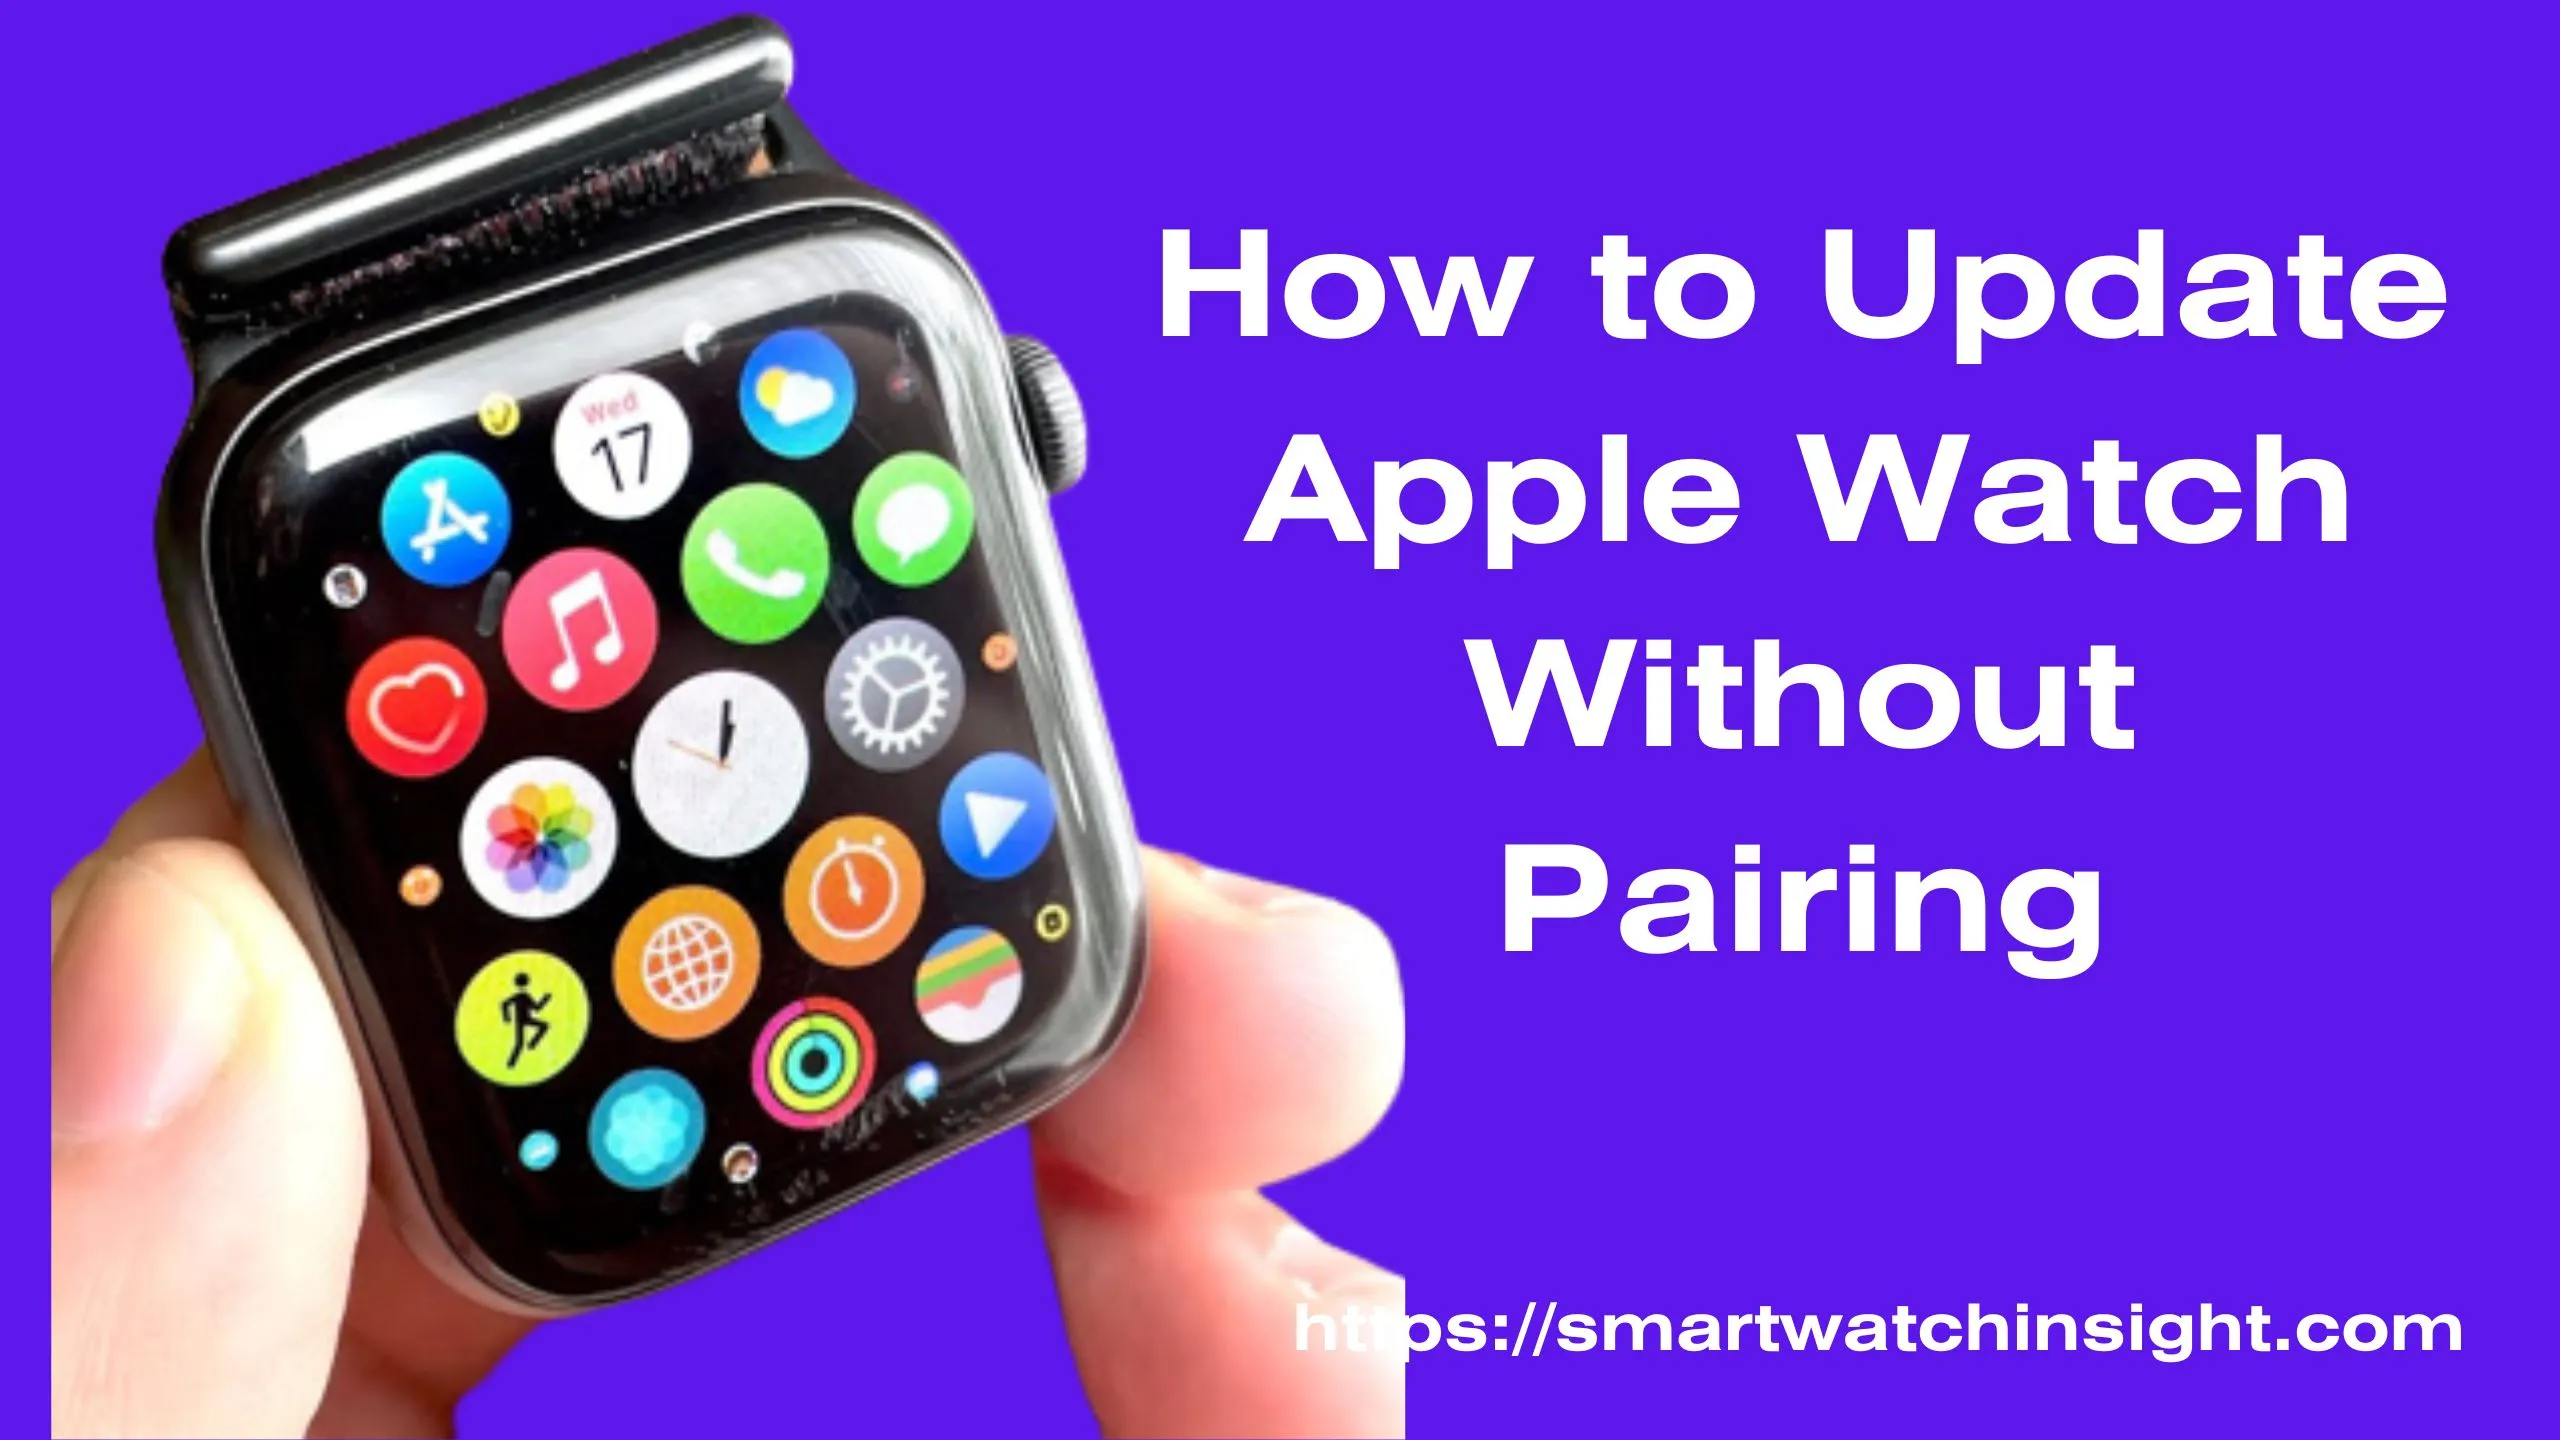 How to Update Apple Watch Without Pairing